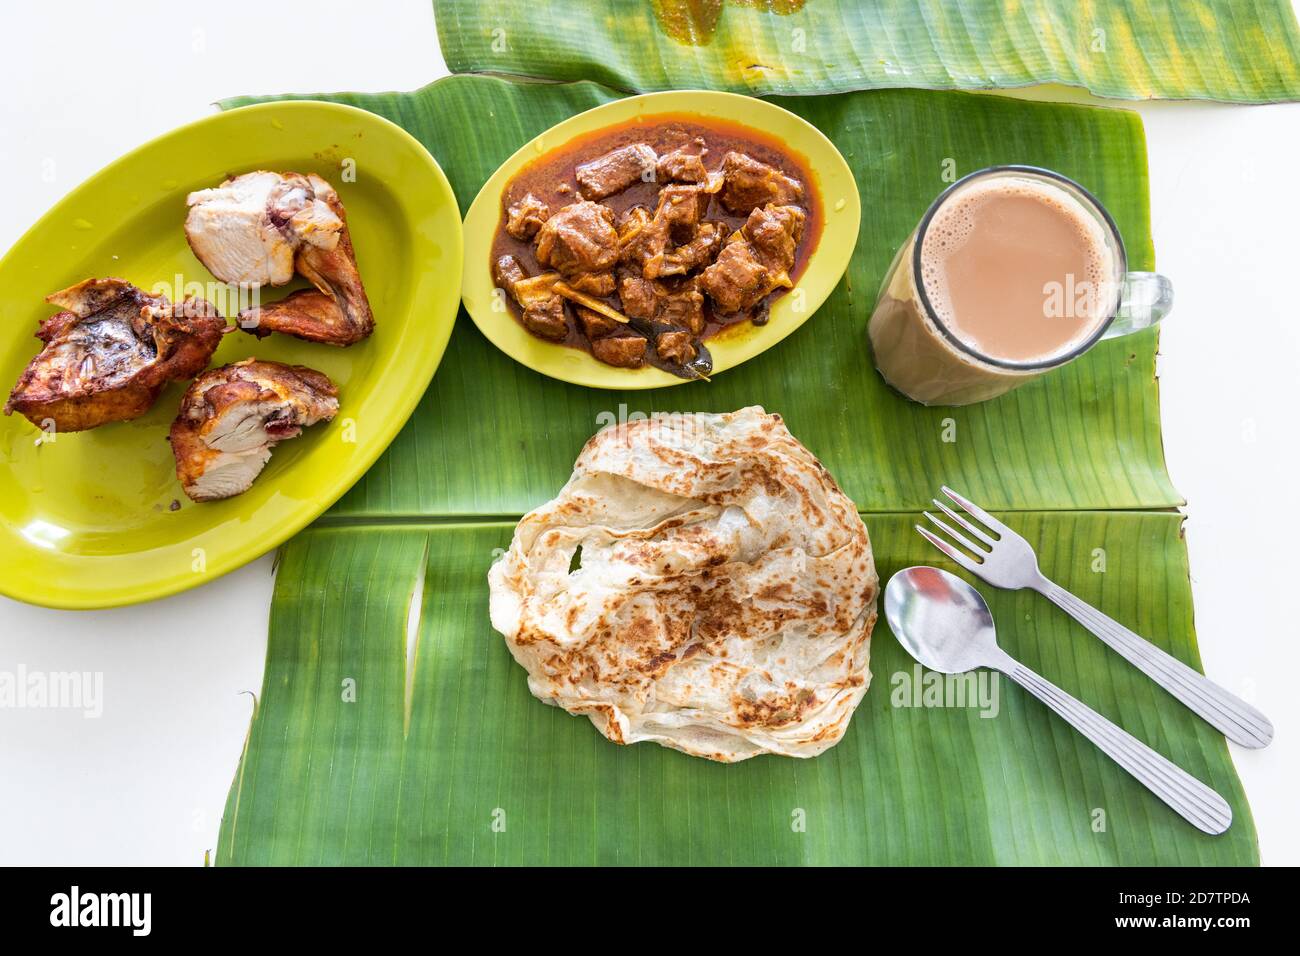 Overhead view of roti canai or paratha served on banana leaf, with mutton curry and fried chicken Stock Photo